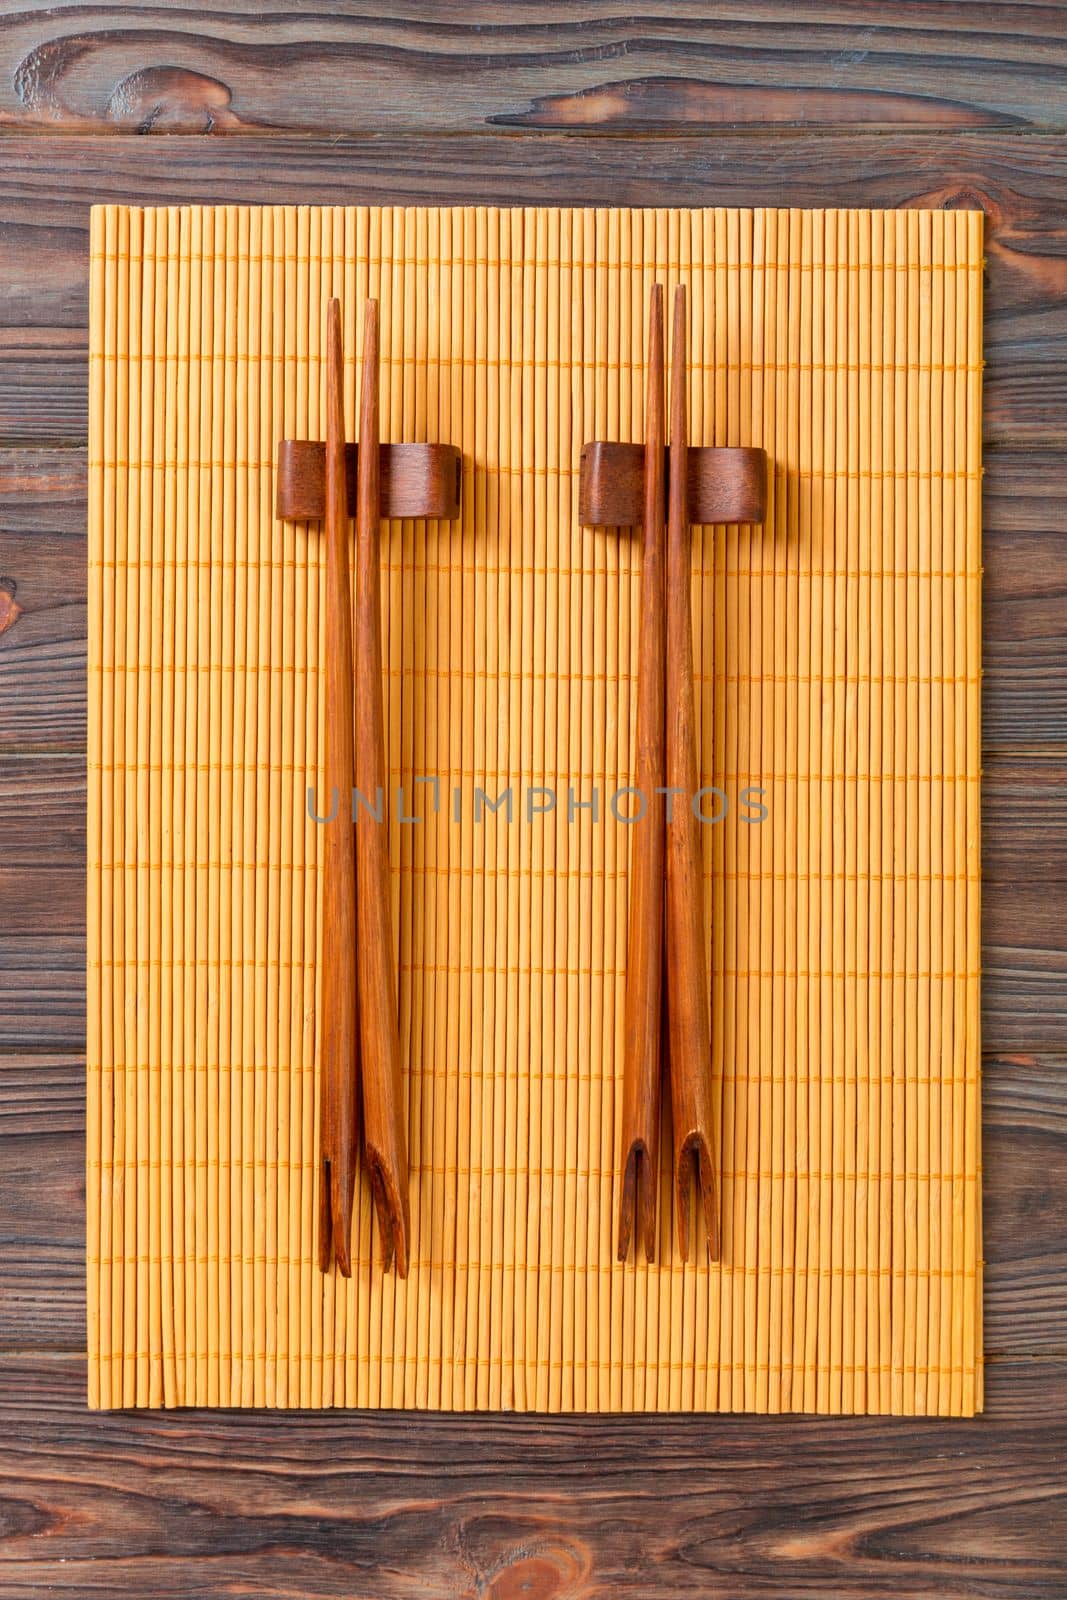 two sets of sushi chopsticks on wooden bamboo background, top view by Snegok1967